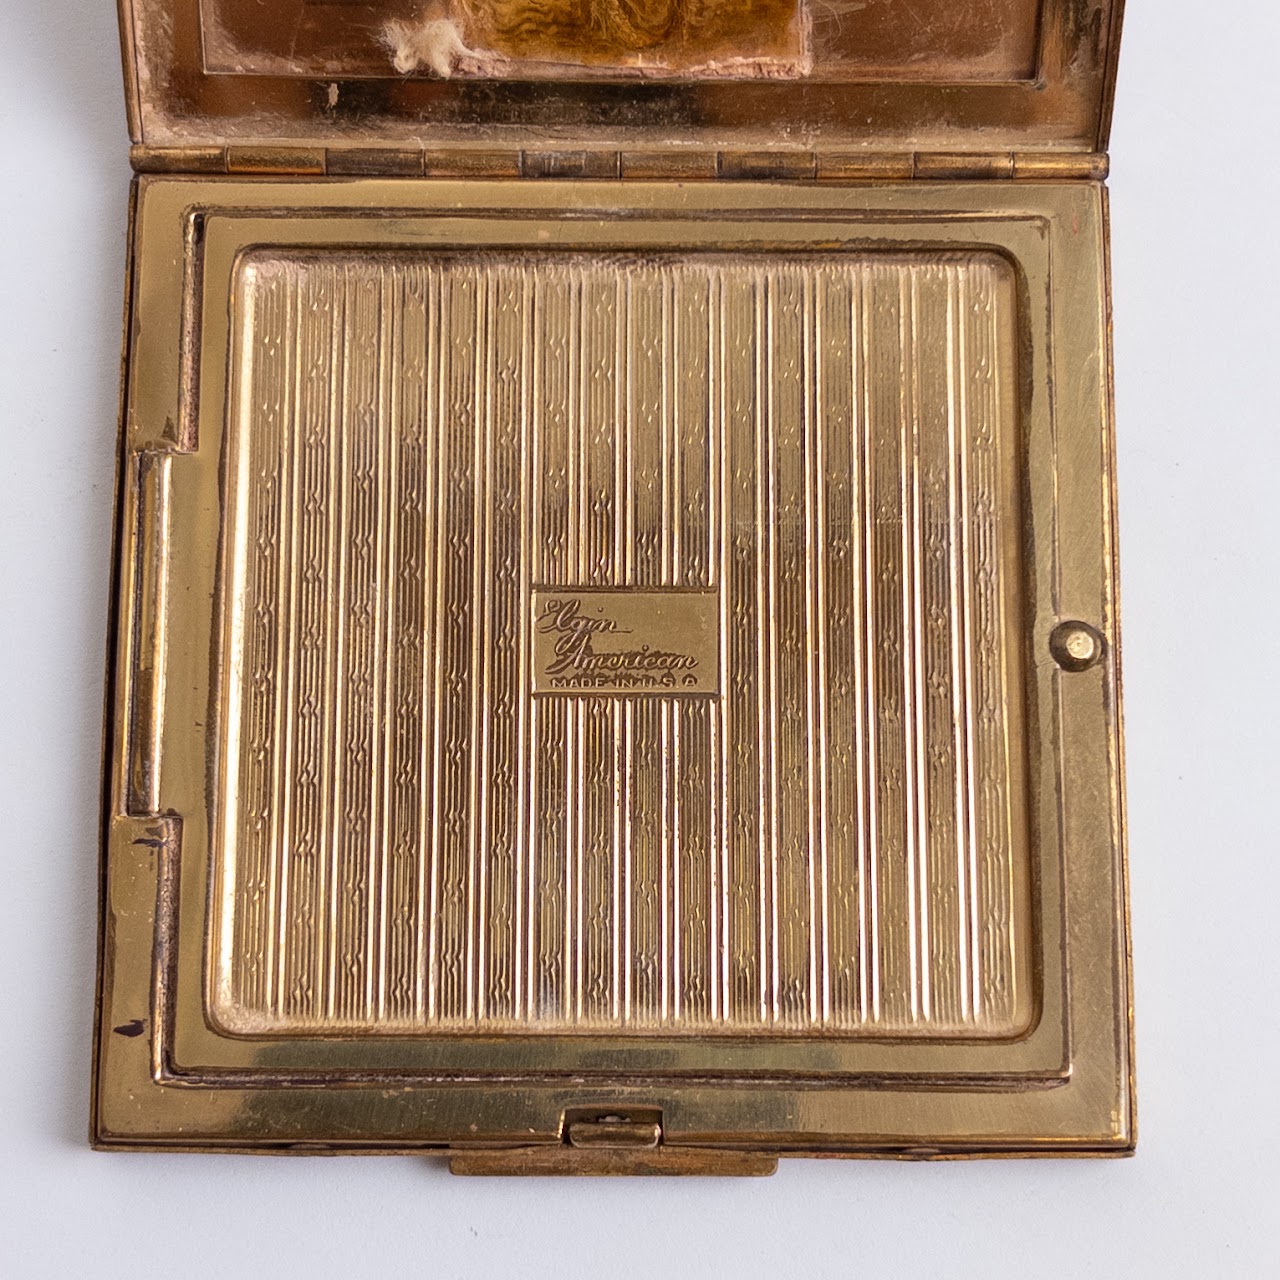 Brass Cosmetics Compact with Depression and WW2 Era Program Stamps